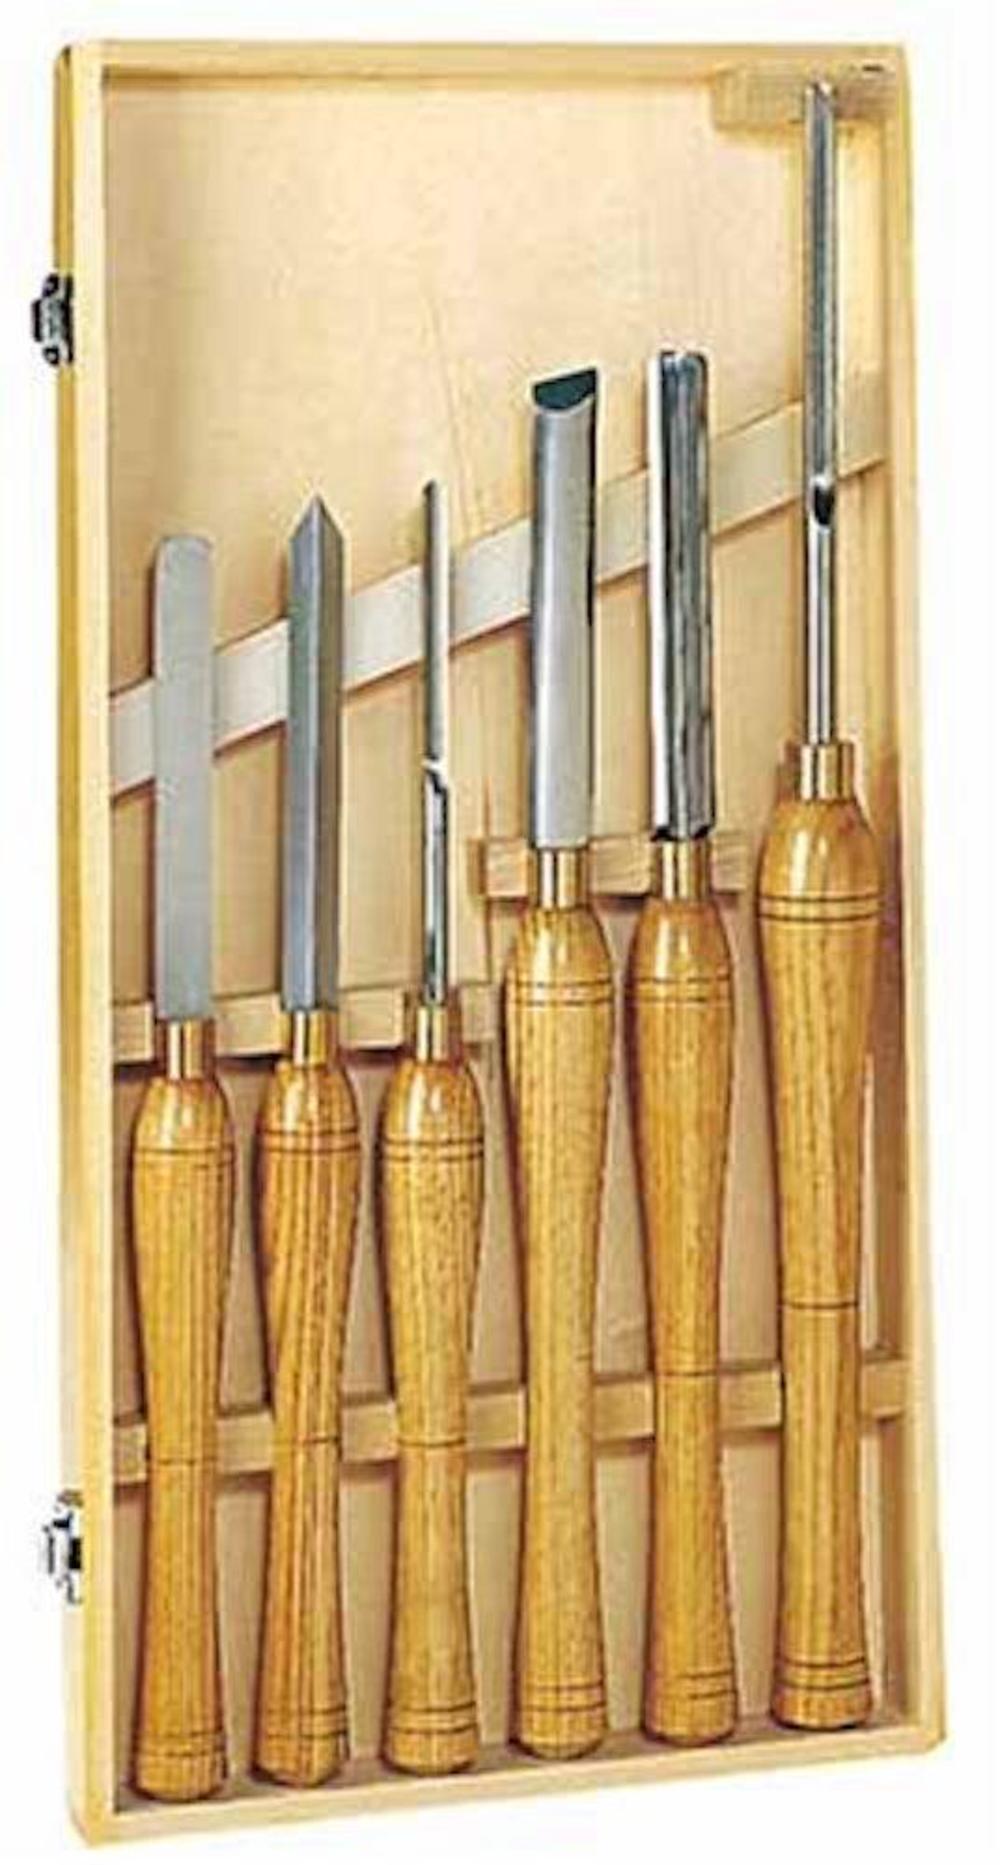 PSI Woodworking lcgrind4 Complete 4-Piece Precision Lathe Chisel Sharpening System